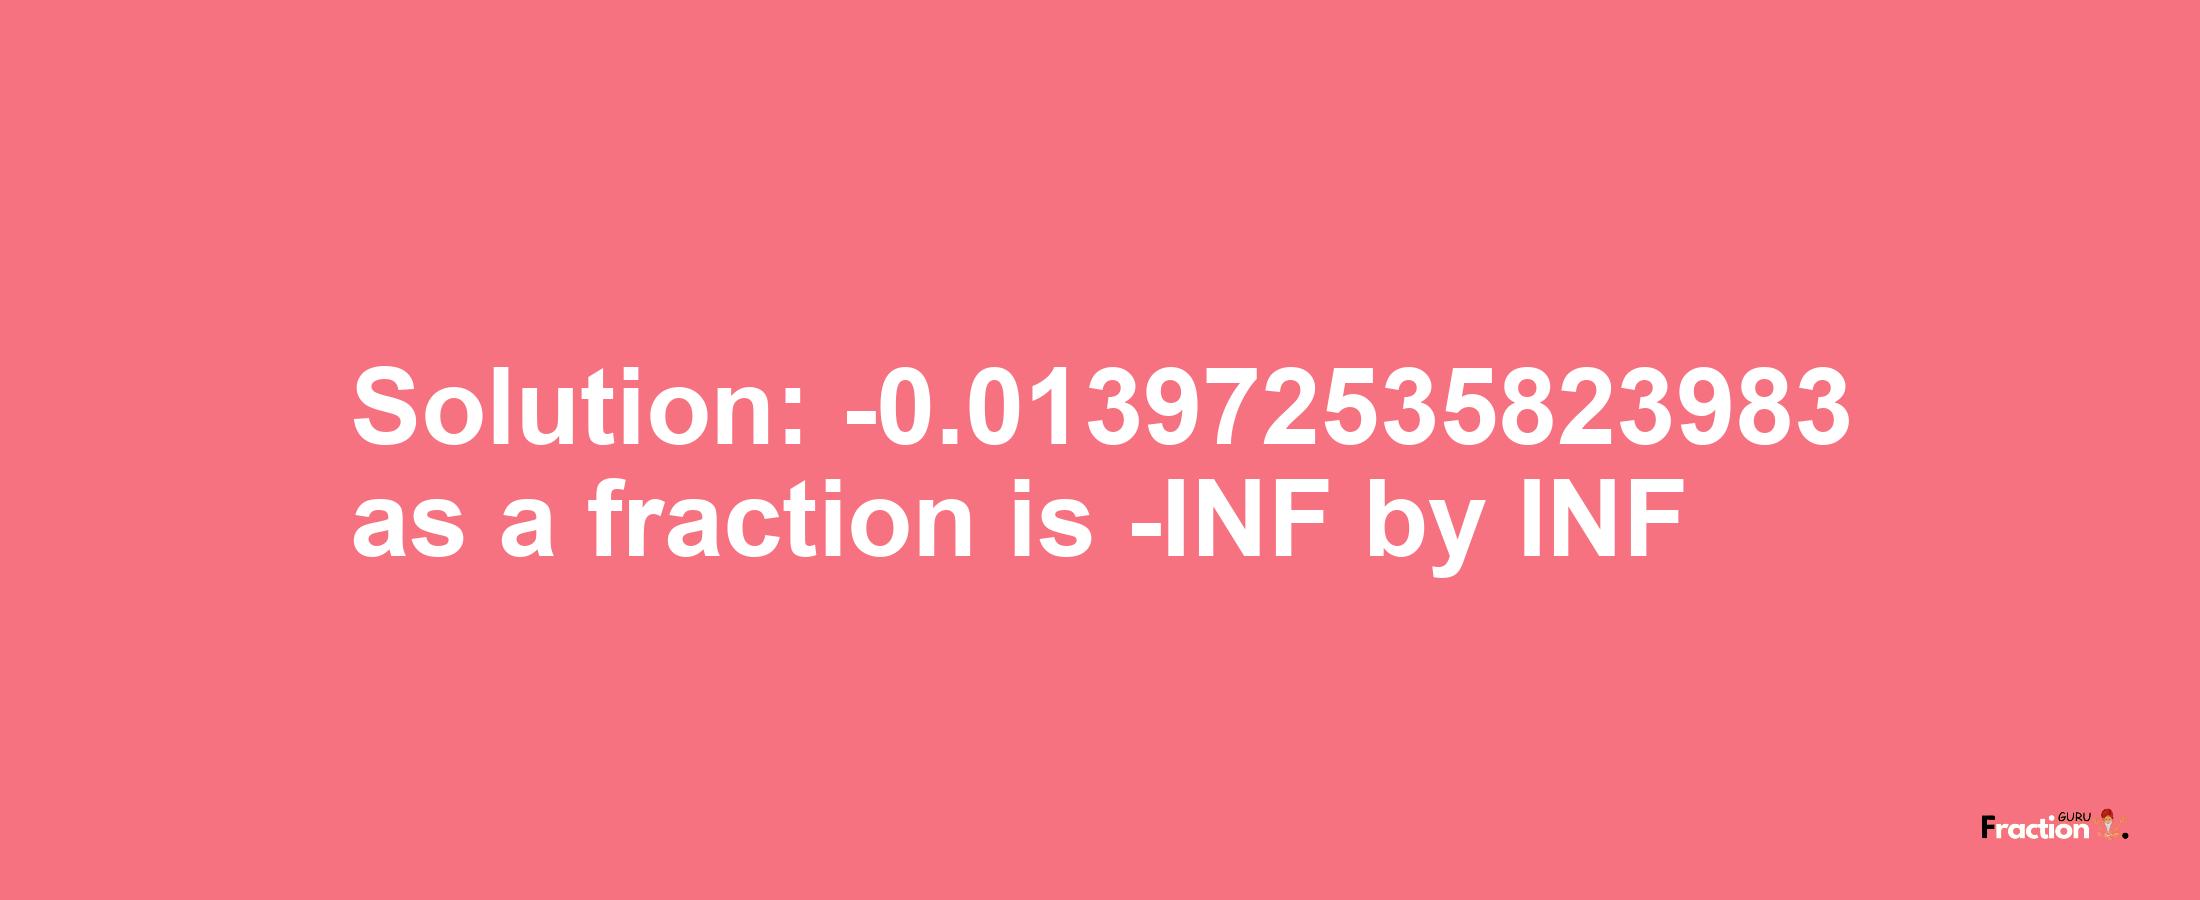 Solution:-0.013972535823983 as a fraction is -INF/INF